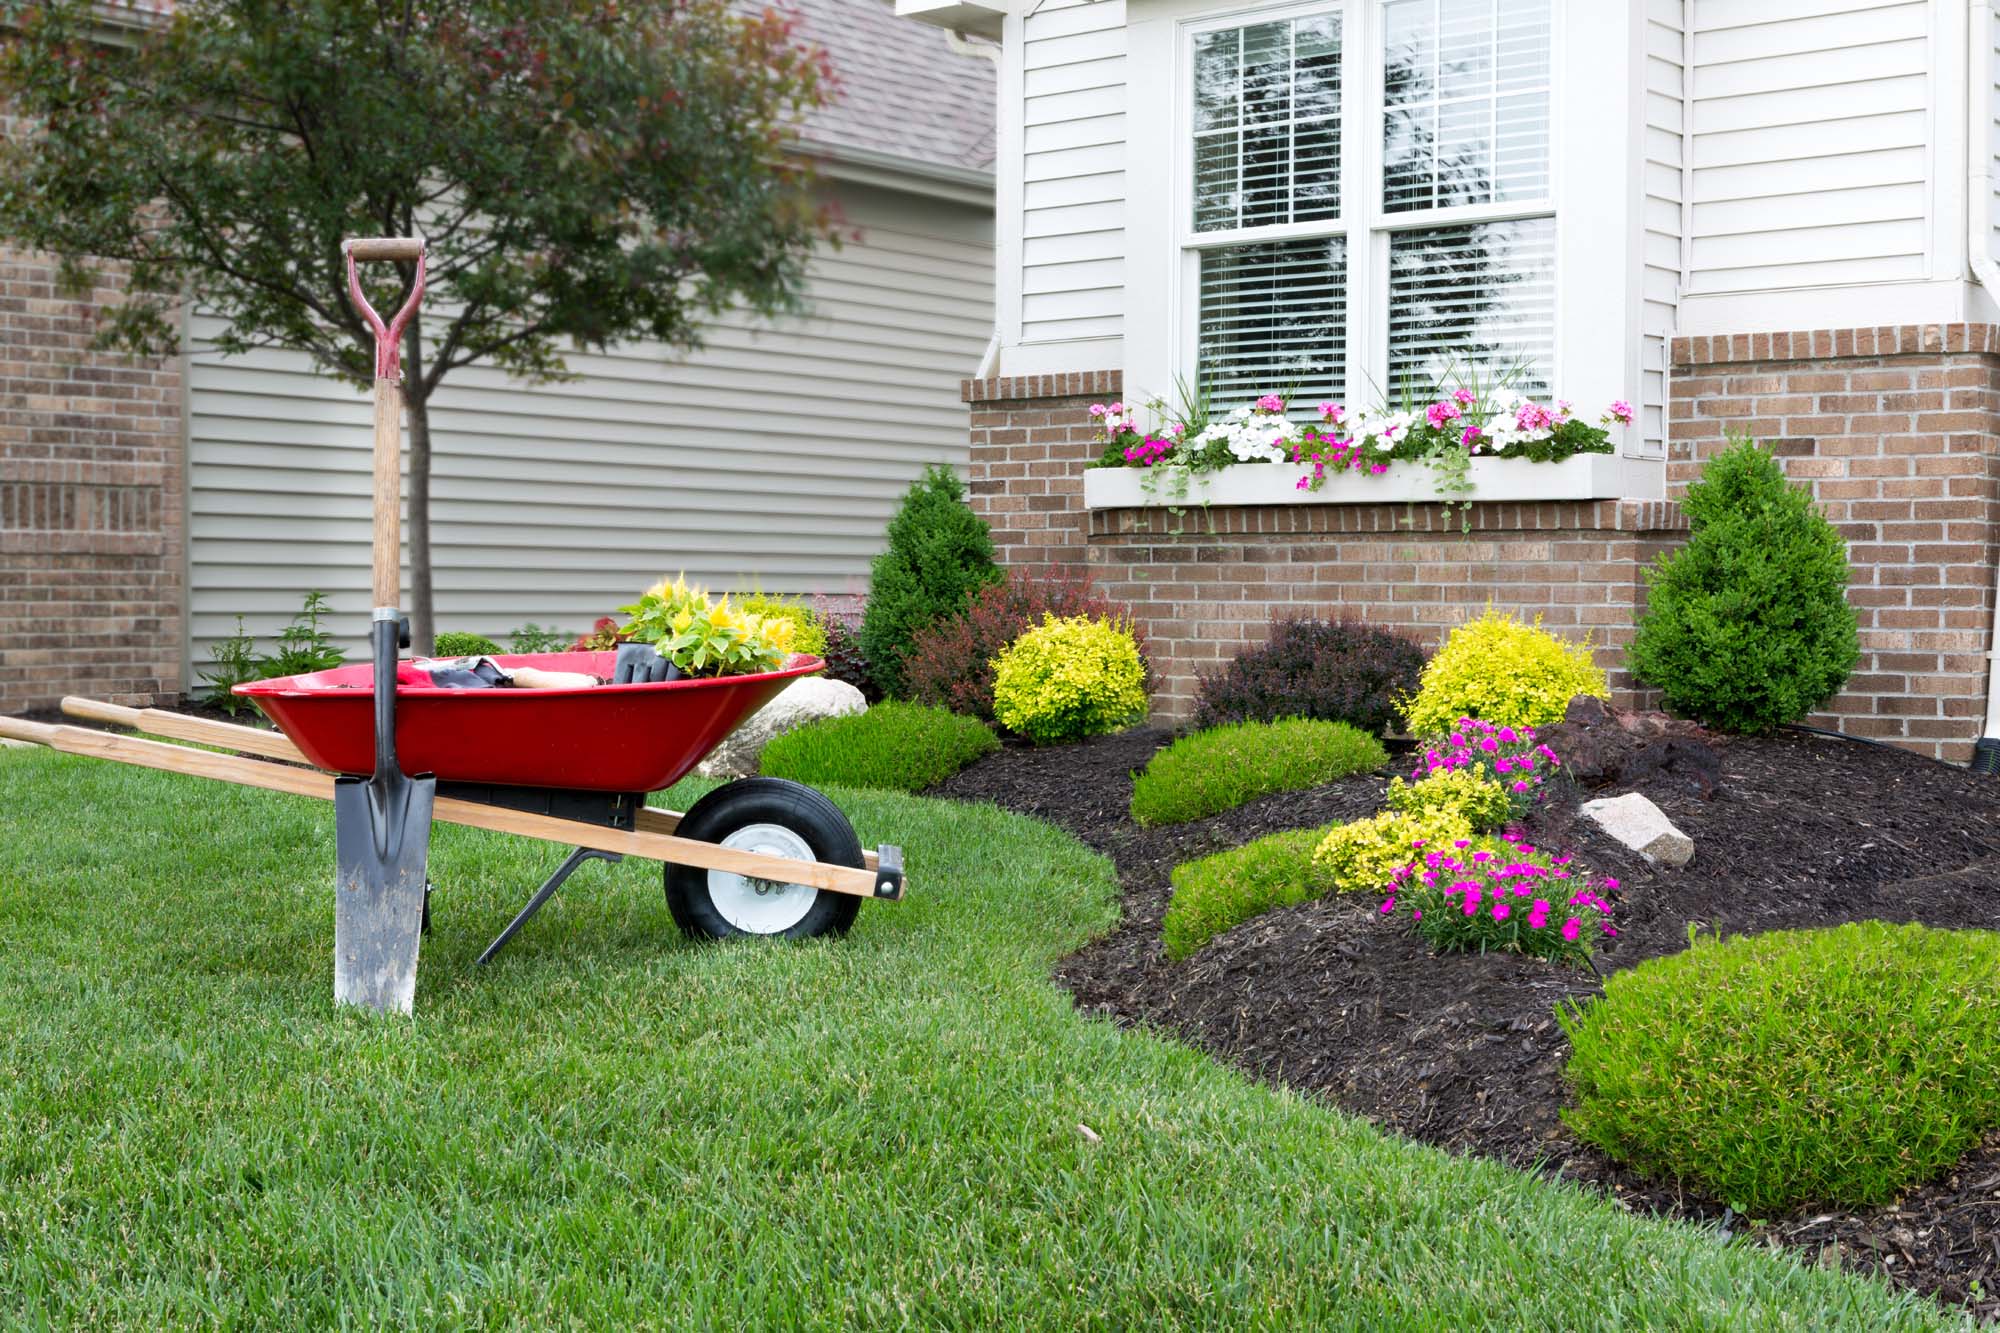 Best Landscaping in Frisco Texas - My Neighbor Services